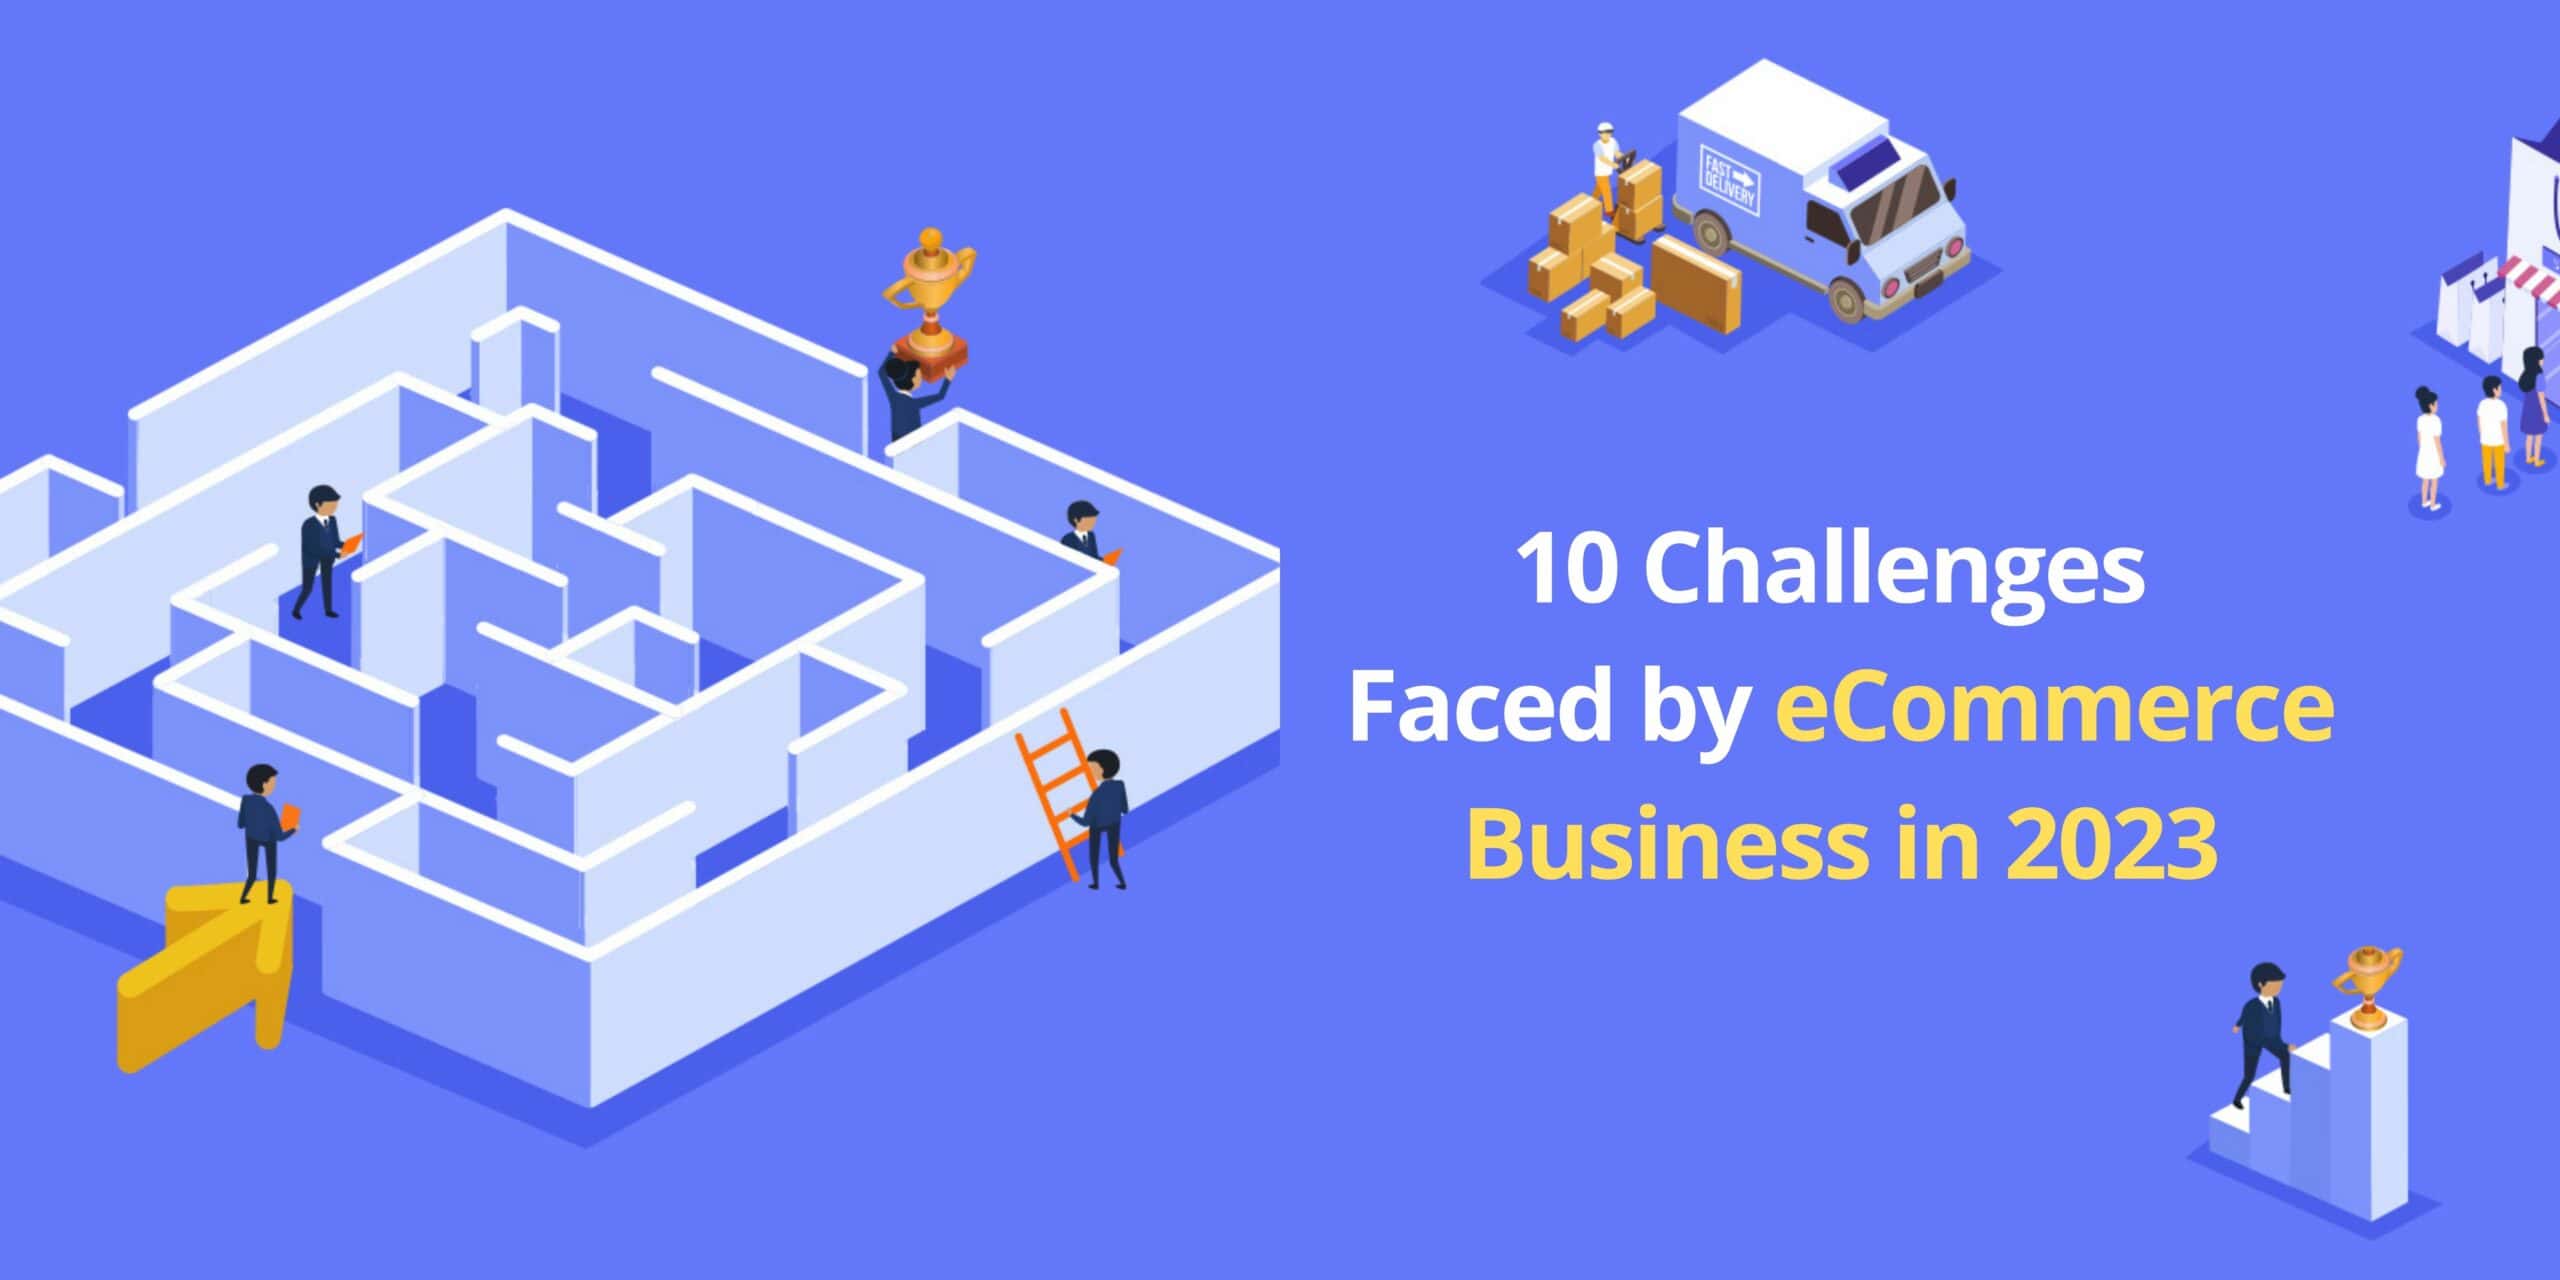 Challenges Faced by eCommerce Business